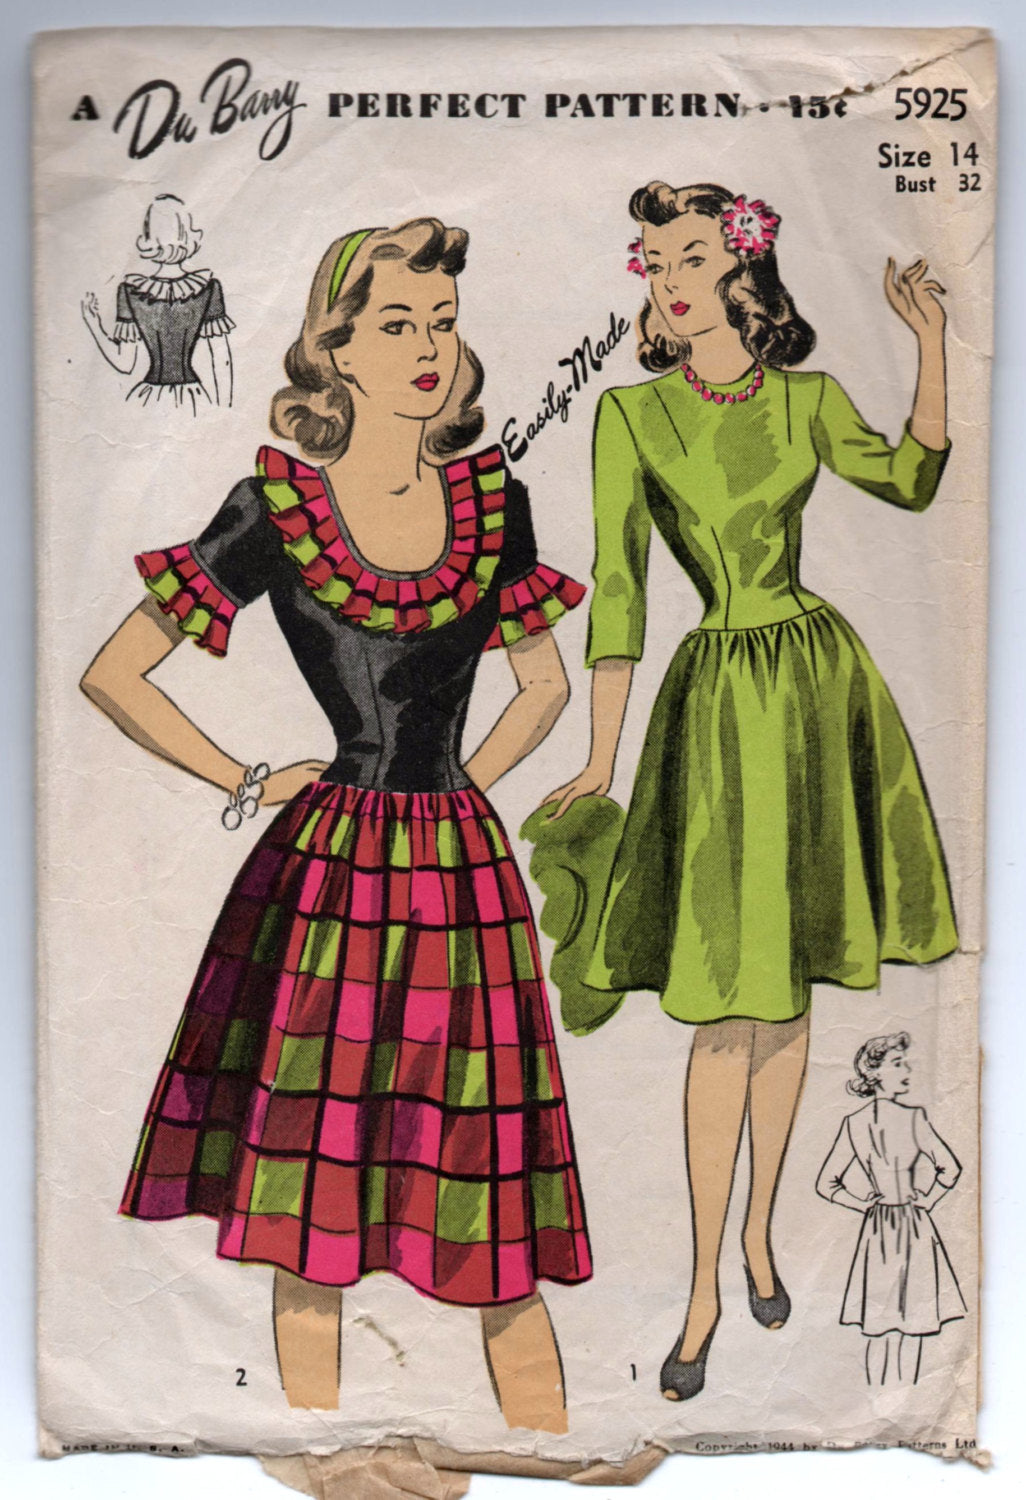 1940's DuBarry One-Piece Dress with Scoop Neck and Ruffle Trim or High Neck Pattern - Bust 32